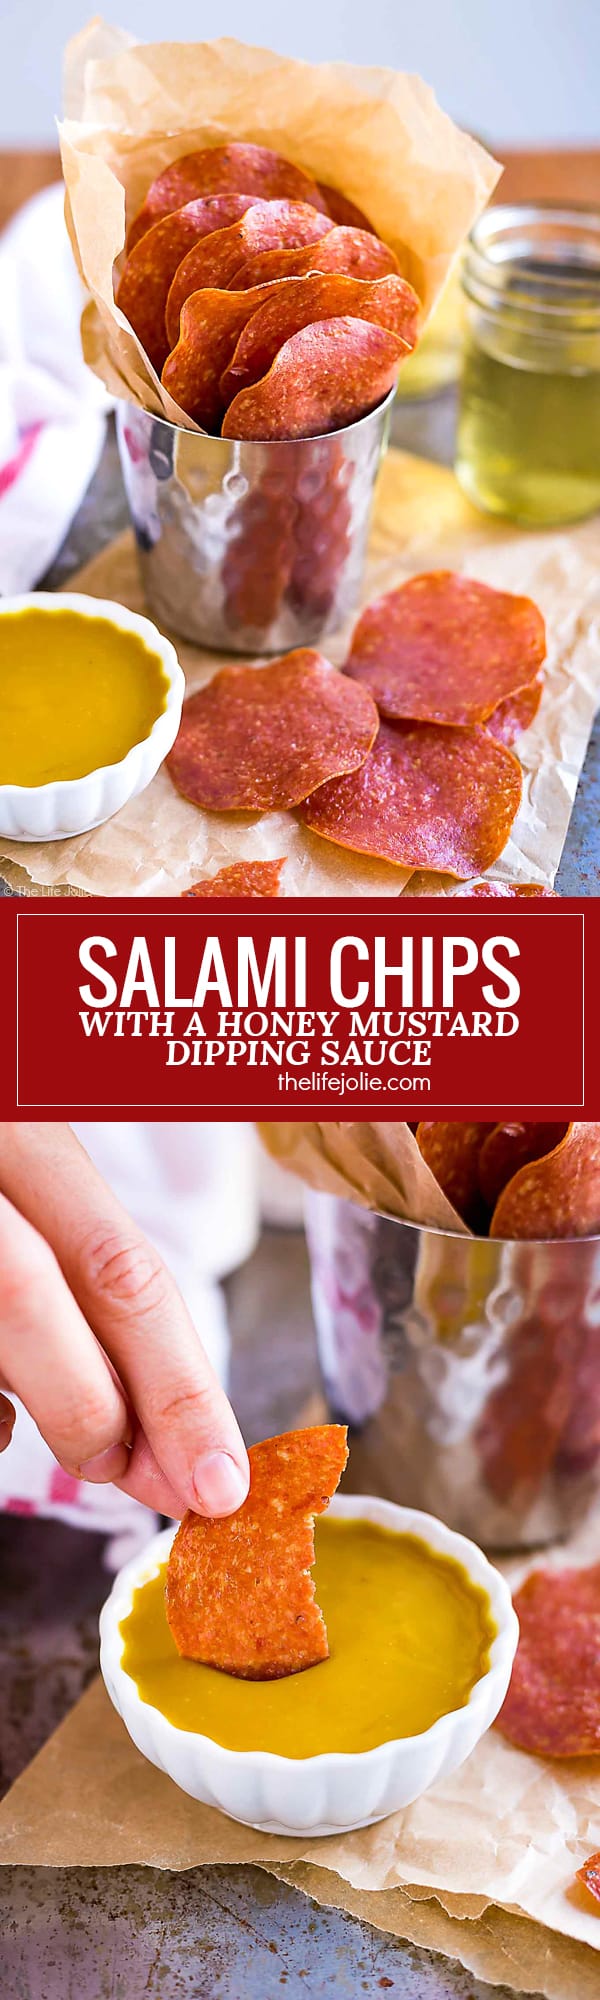 These Salami Chips are a seriously addictive appetizer recipe! They're super easy snacks to make and taste even better with a Honey Mustard dipping sauce. This is the perfect food to bring to parties and game day gatherings!